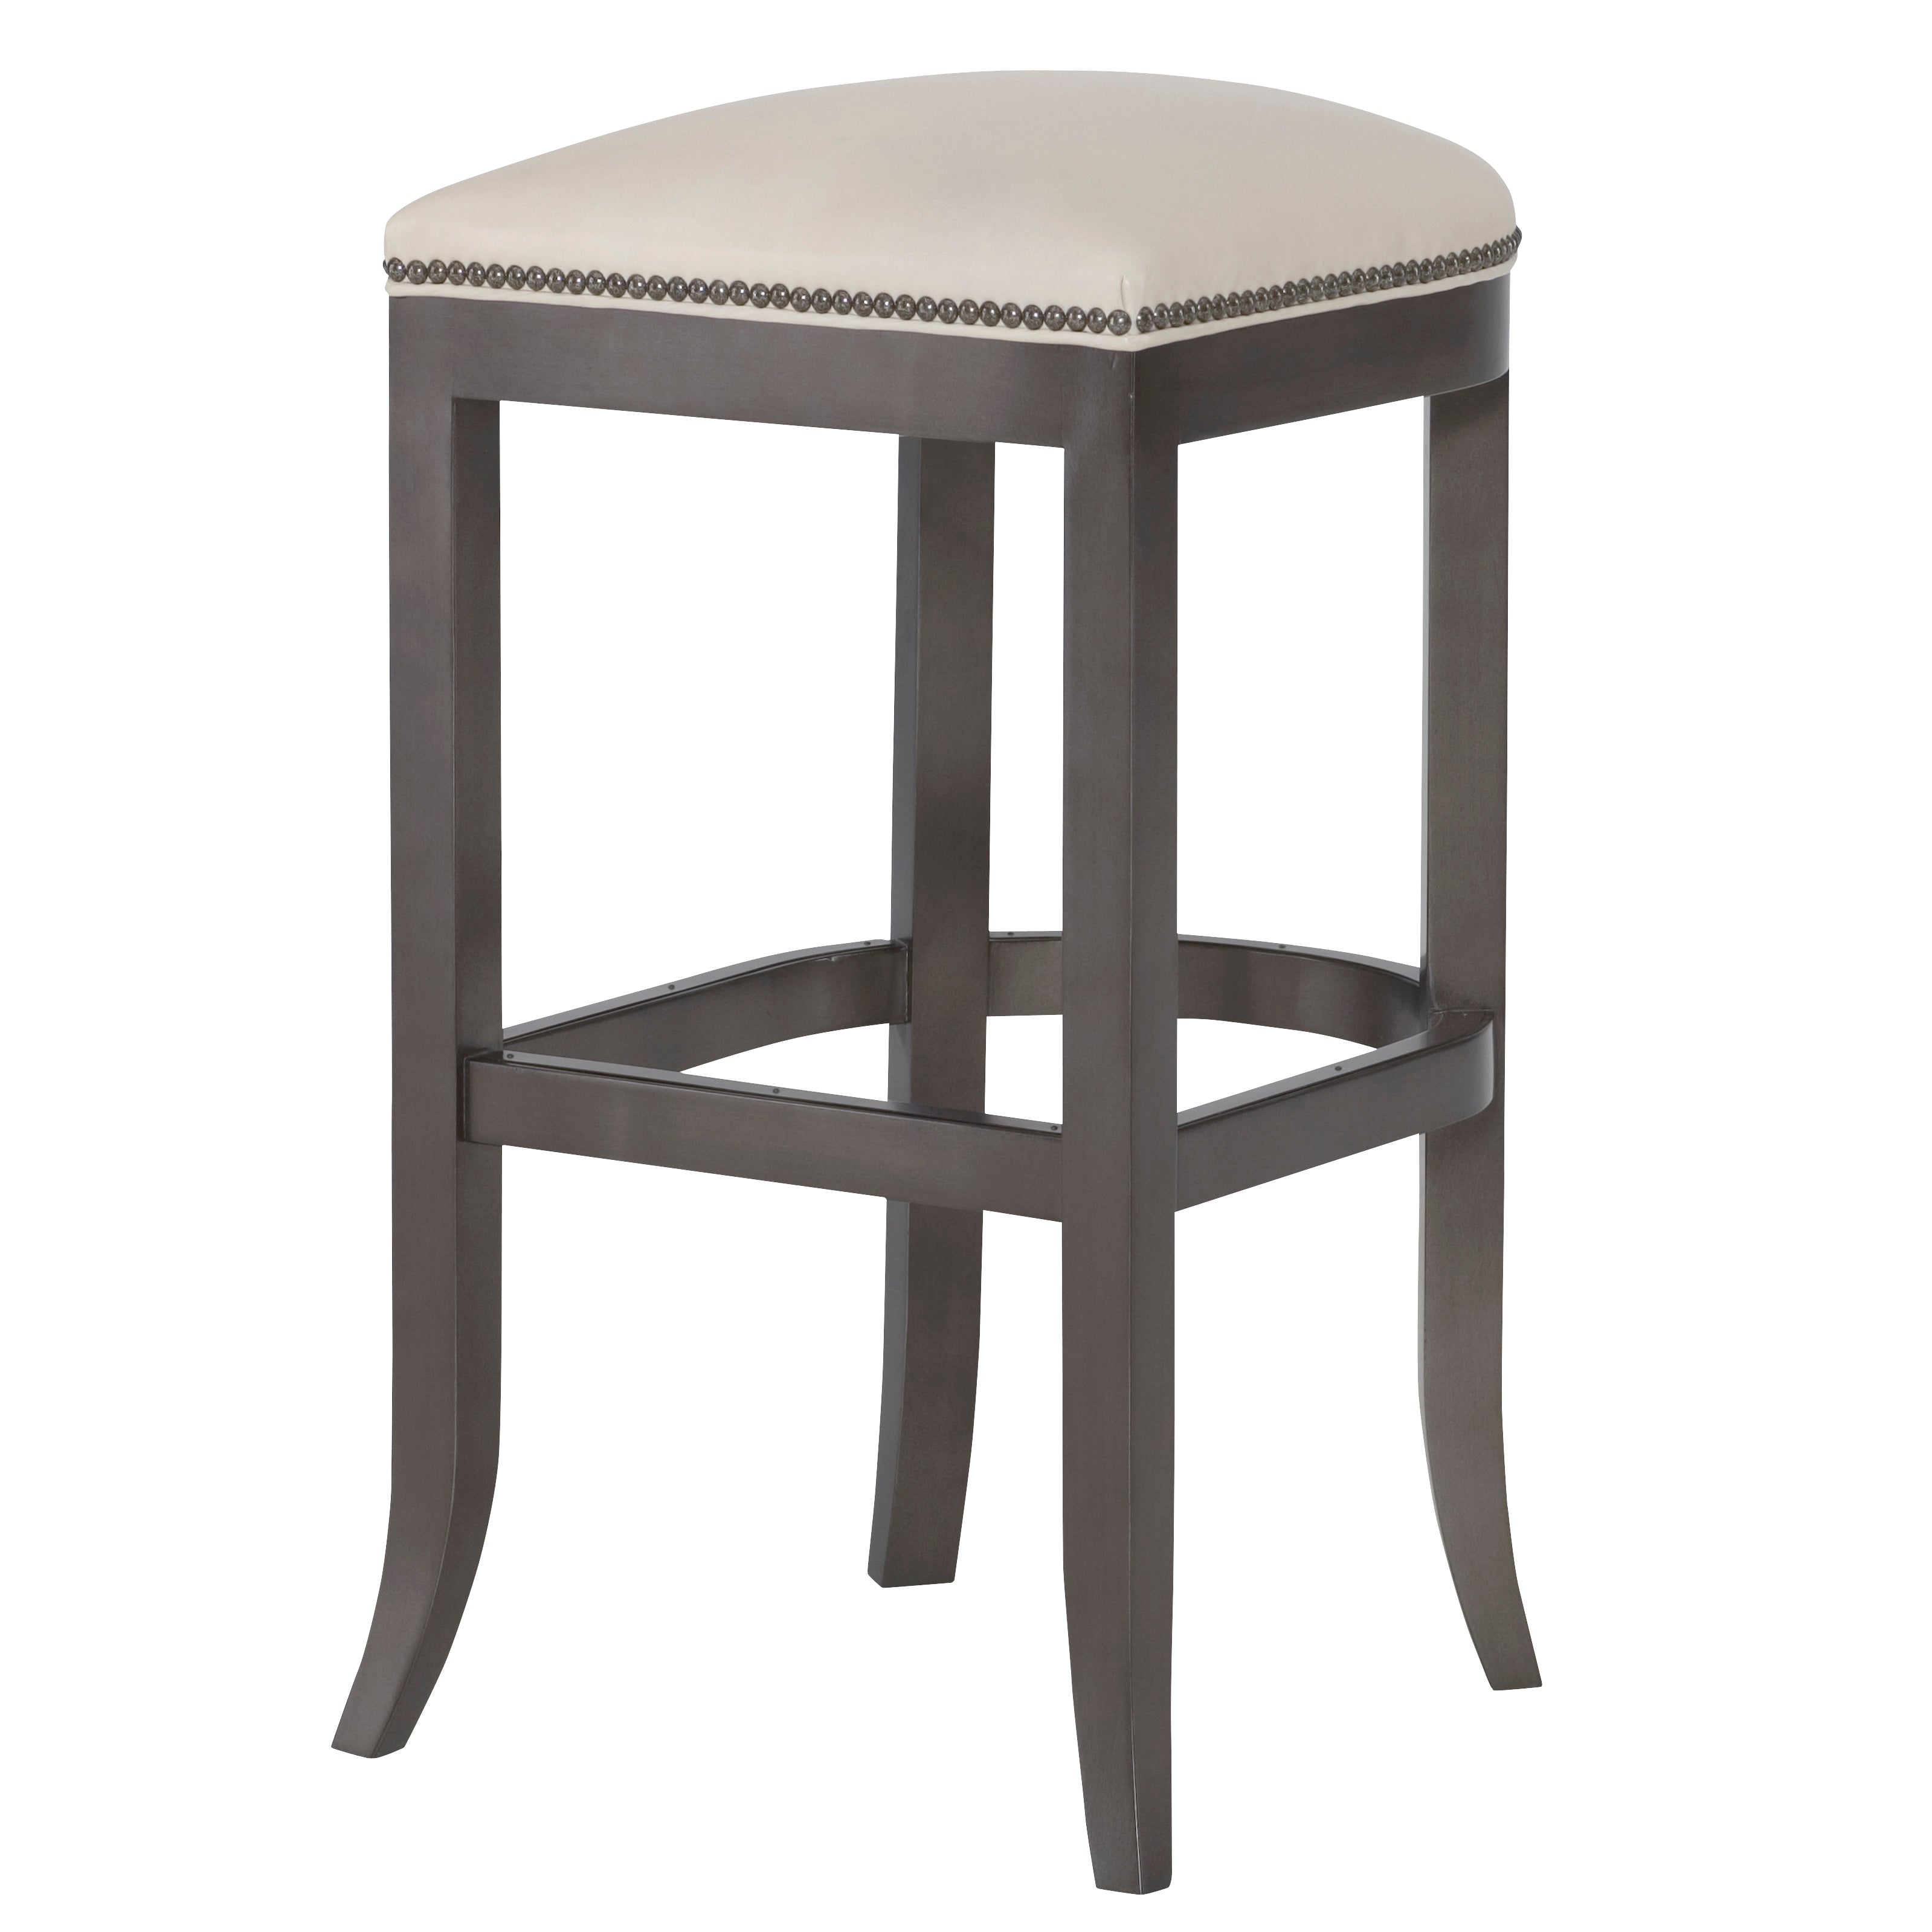 Clara Bar Stool in Tribeca Cream leather by Wesley Hall